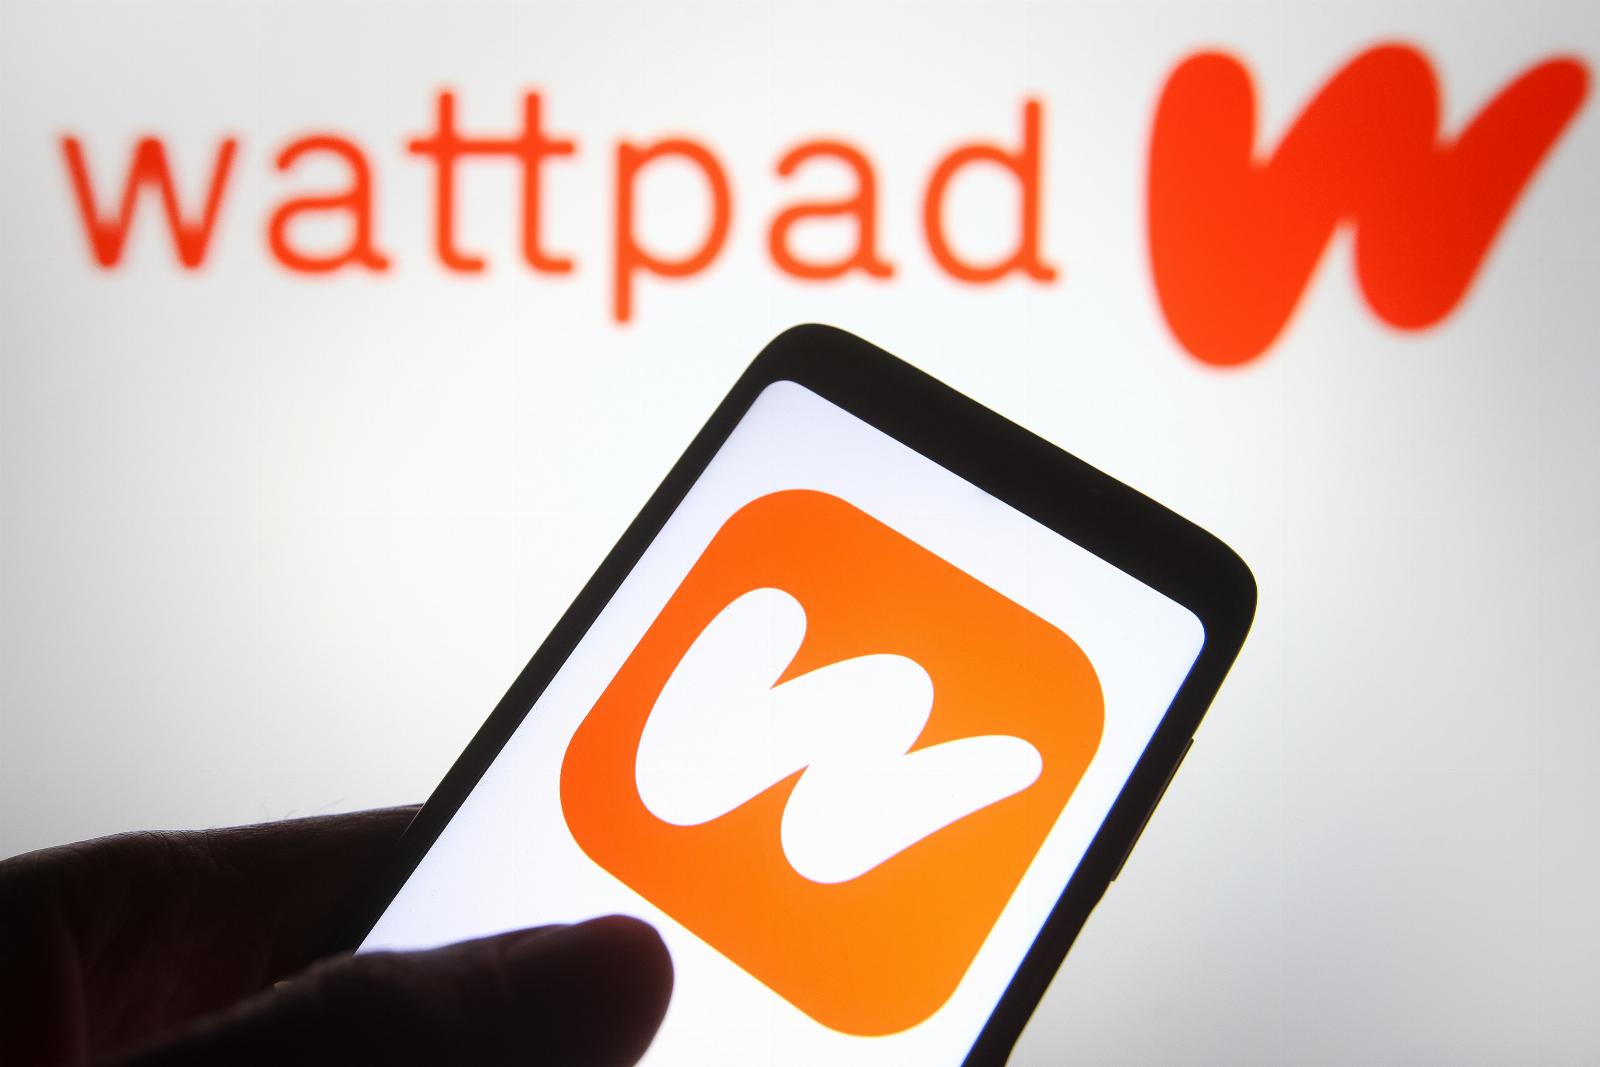 Wattpad ditches ‘Paid Stories’ for a freemium model